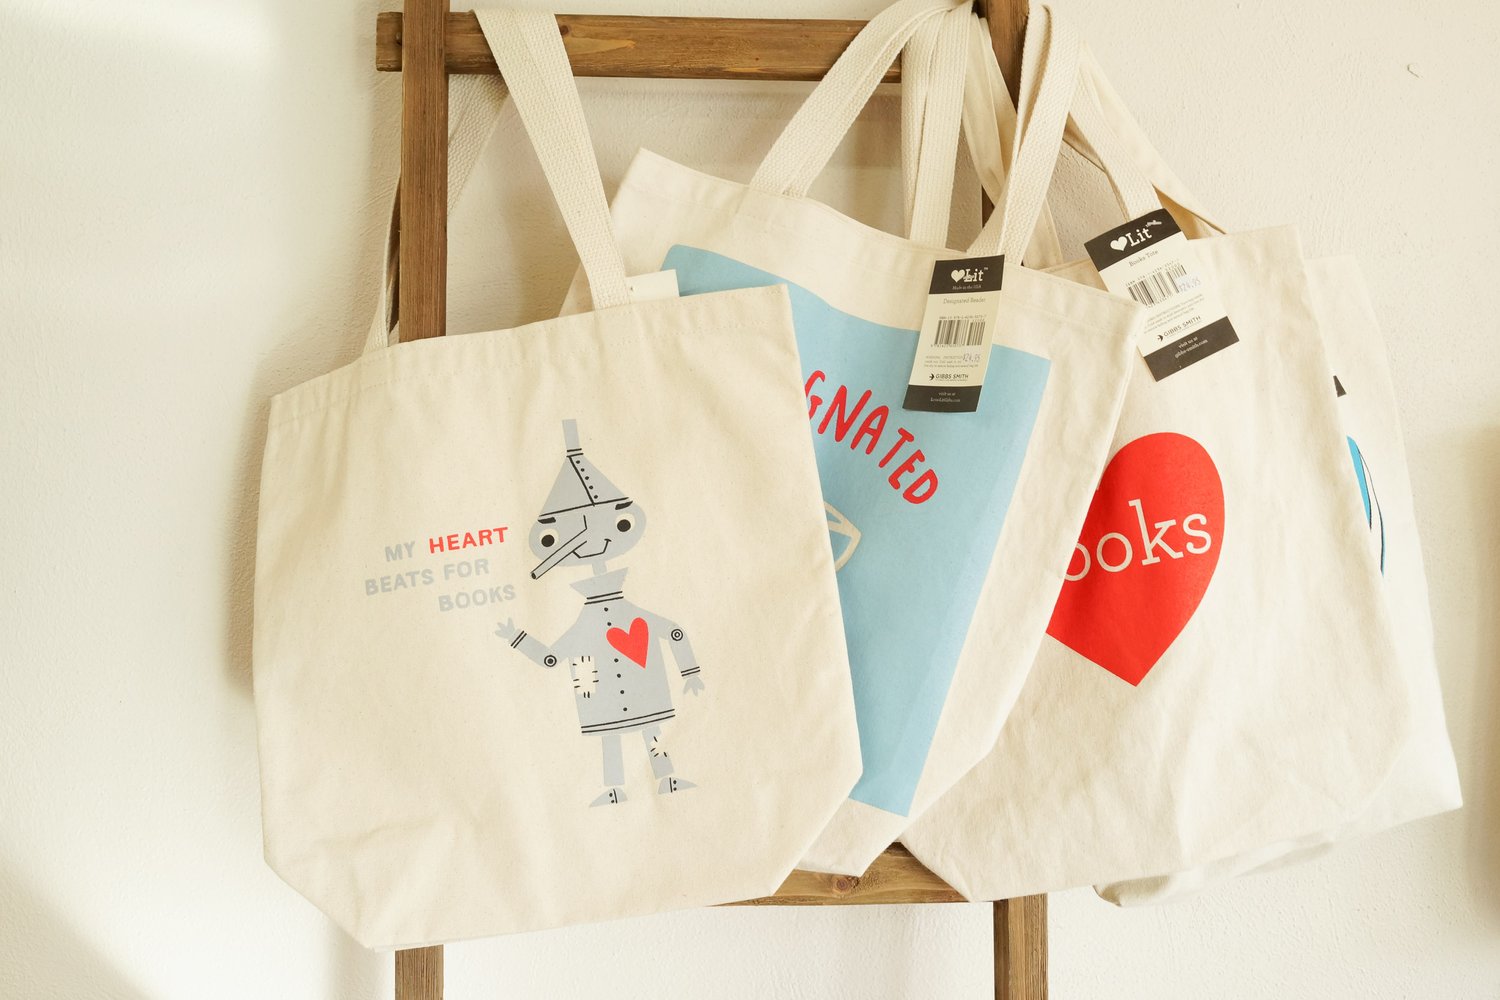 Lodge I Canvas Tote Bag - Laural Home